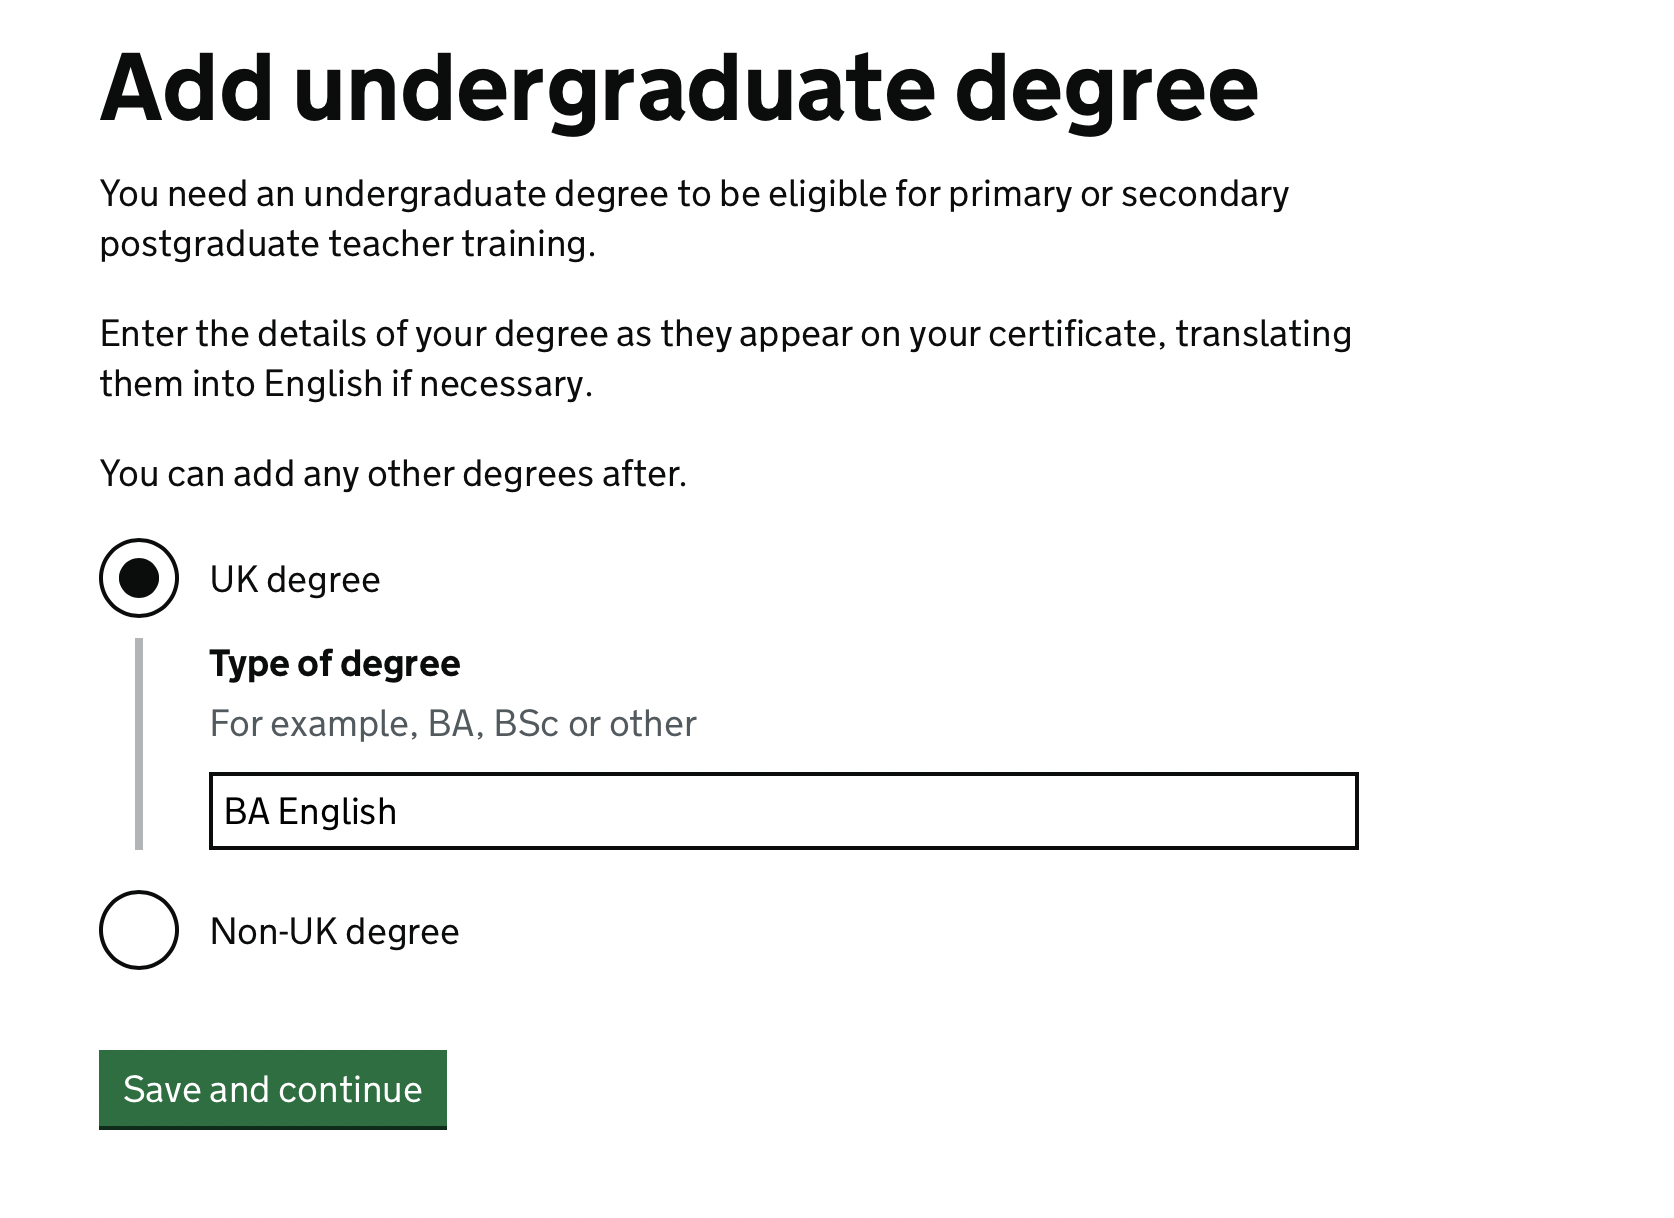 Screenshot showing ‘Add undergraduate degree’ with options for ‘UK degree’ and ‘Non-UK degree’, with a follow-up question of ‘Type of degree, for example BA, BSc or other’ which is filled in with ‘BA English’